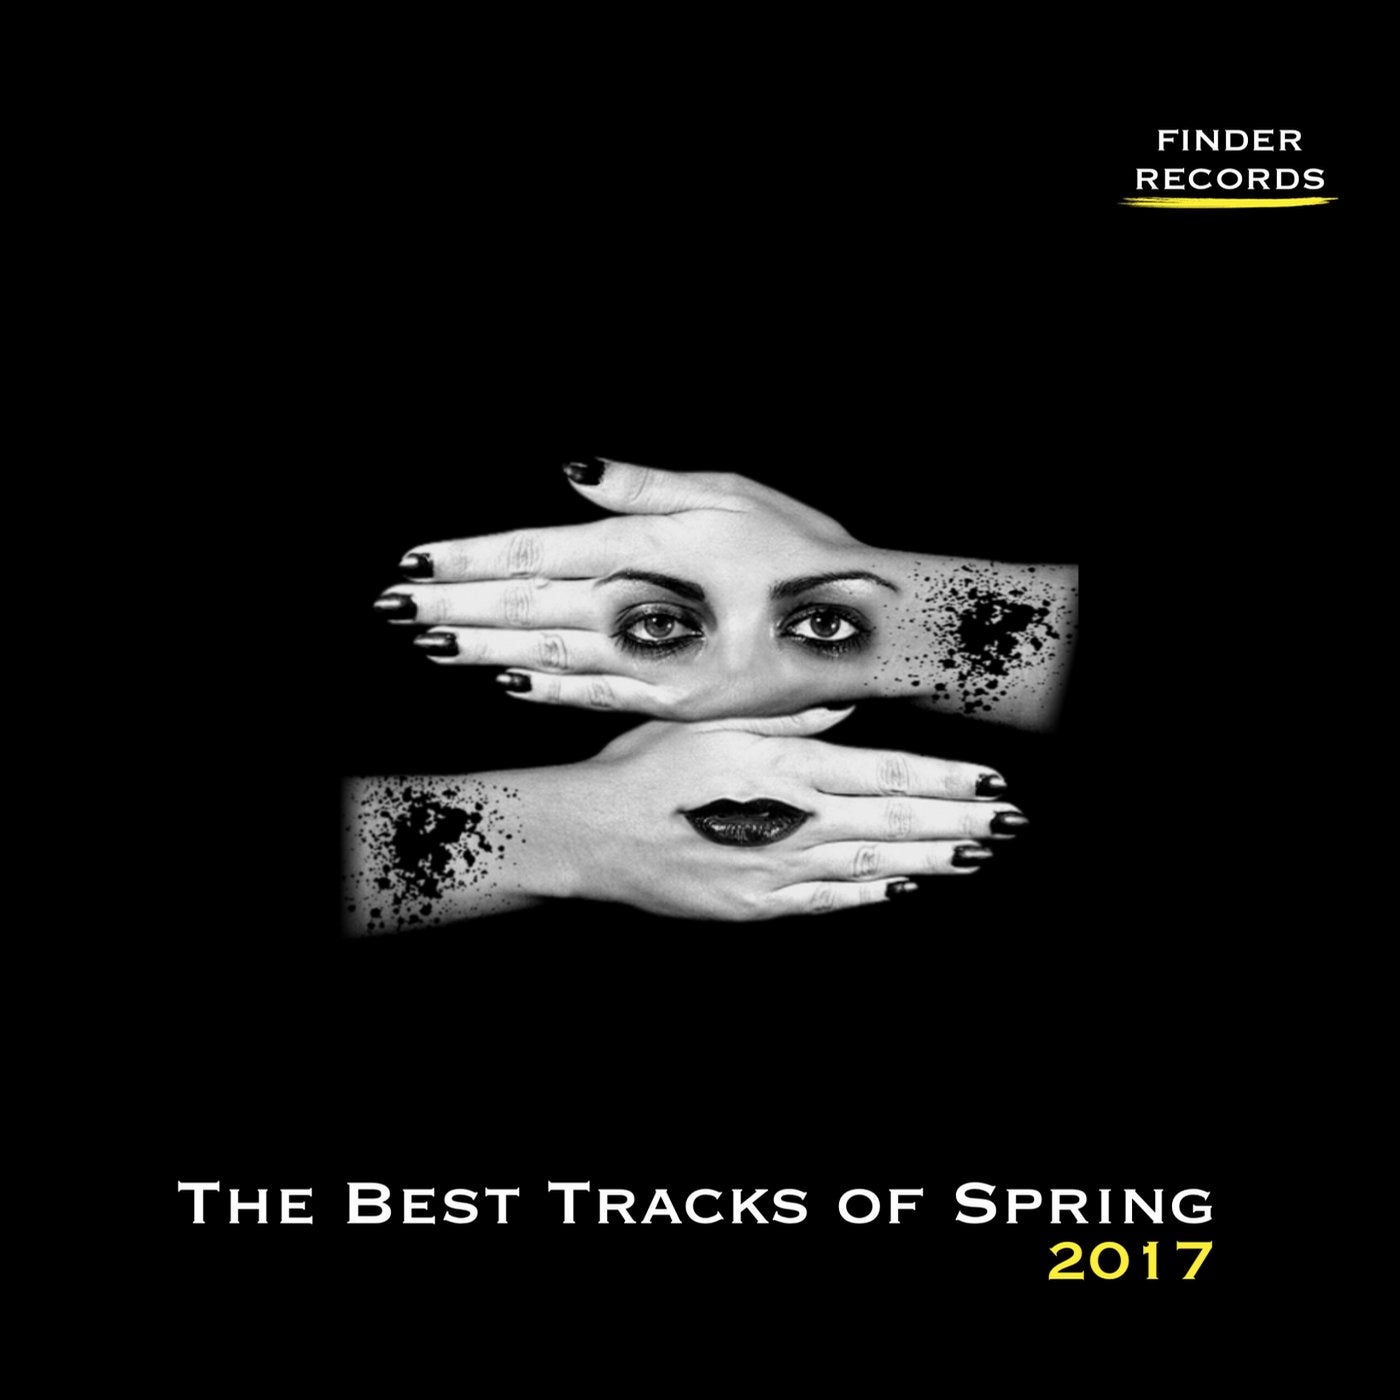 The Best Tracks of Spring 2017